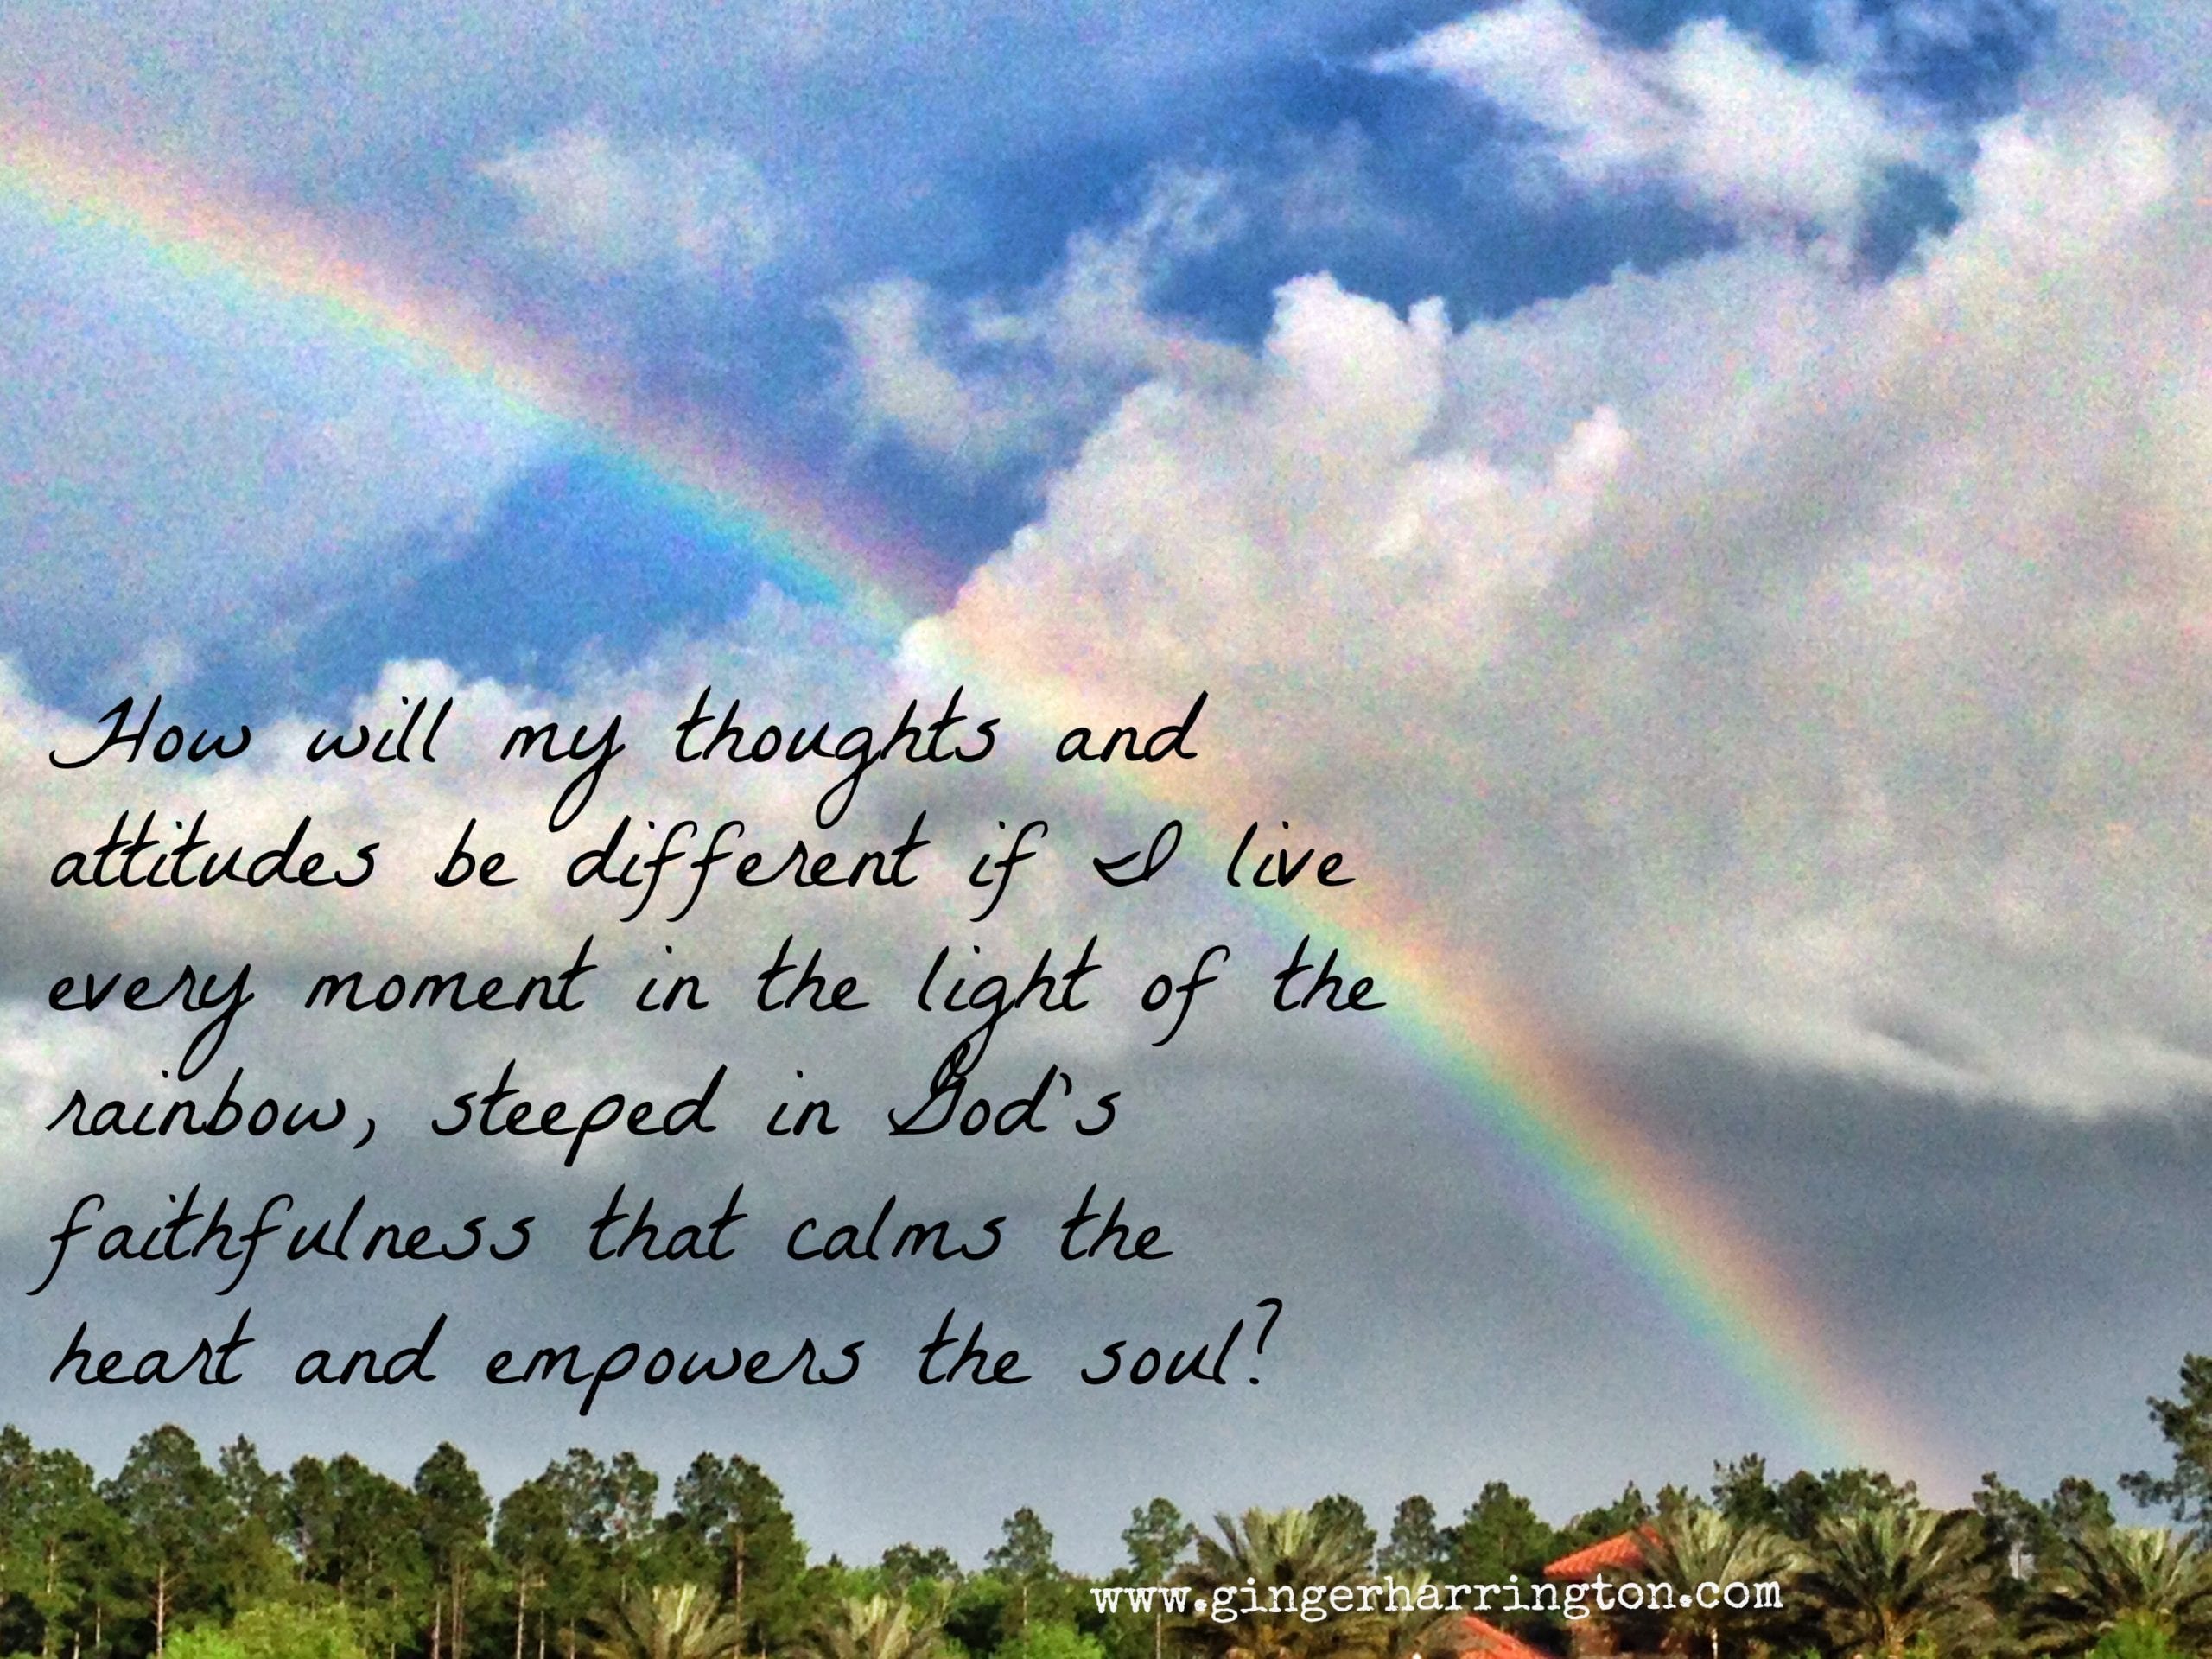 In Rainbow’s Light: Live in the Light of God’s Presence